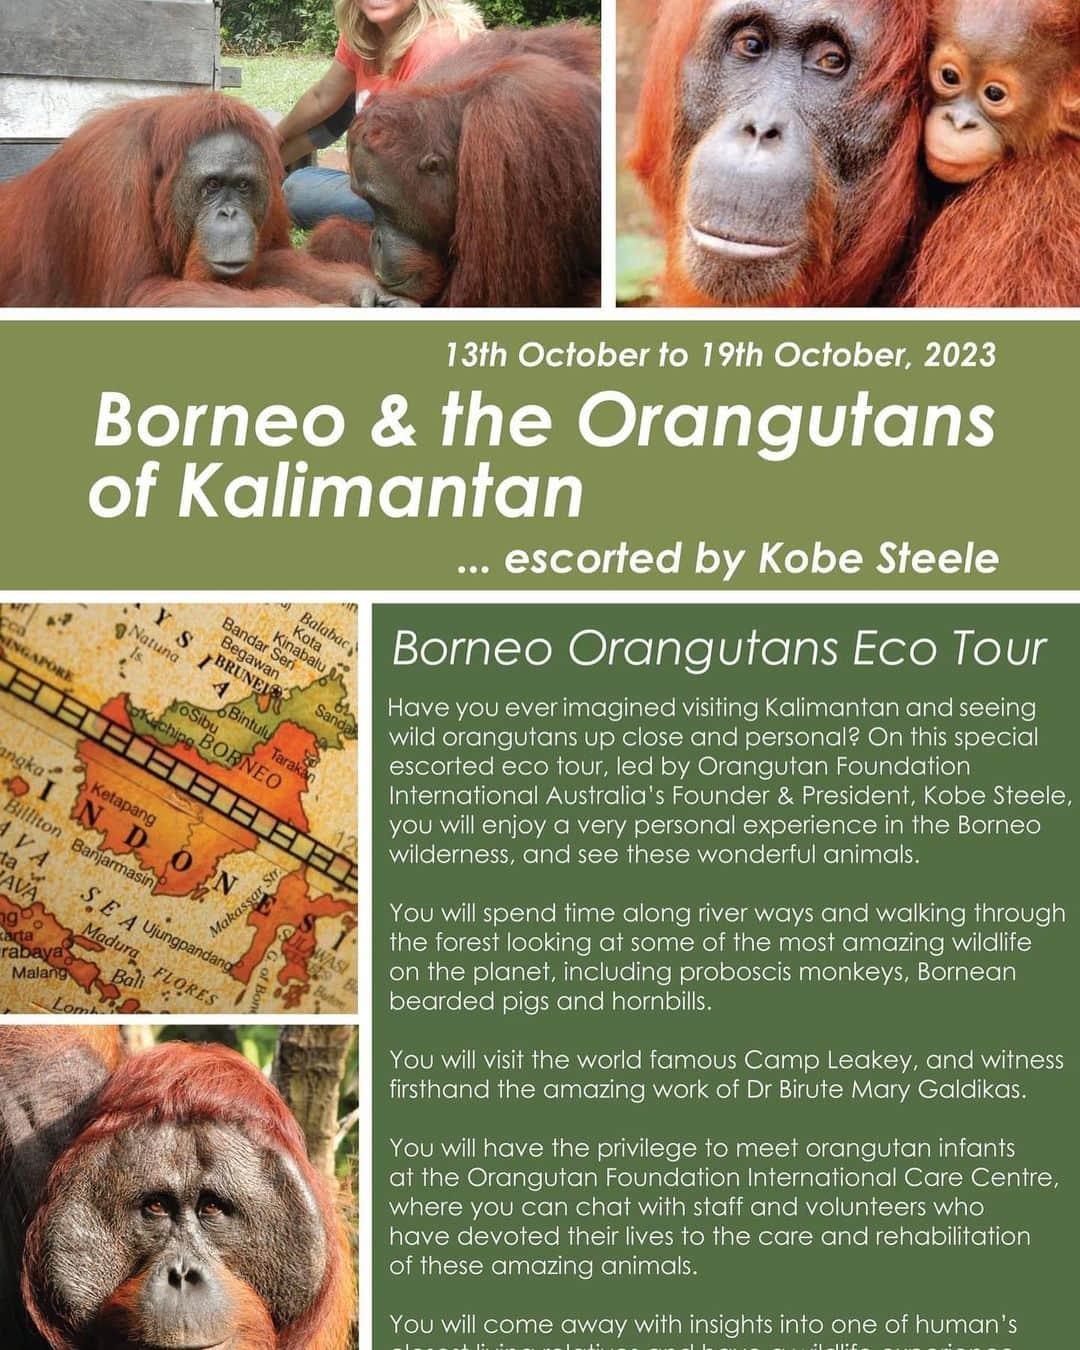 OFI Australiaのインスタグラム：「Come with us on our October, 2023 Borneo Orangutans Eco Tour!  Have you ever dreamed about travelling to Borneo and spending time with orangutans?   We still have a few places left on our October, 2023 Borneo Orangutans Eco Tour (13th to 19th October), escorted by OFI Australia’s President Kobe Steele, OAM.   On this special escorted tour, you will enjoy a very personal experience in the Borneo wilderness and see wild orangutans in their natural environment, as we spend time along the river ways, walking through the jungle and visiting OFI’s world famous Camp Leakey.  As part of this extraordinary trip, you will have the privilege of visiting OFI’s Orangutan Care Centre, normally closed to the general public, where orphaned ex-captive orangutans are cared for, nursed back to health, and taught everything they will need to know to one day thrive in the wild. This is a rare and unique chance to see OFI's rehabilitation and conservation work behind the scenes!  This adventure in Indonesian Borneo really is a once in a lifetime experience ... like spending a week in a David Attenborough documentary.   We hope you'll join us for this life changing adventure!  BOOK YOUR PLACE NOW!  If you would like to book a place/s or for more information, please call Kobe on (+61) 0404 036 653 or you can email kobe@ofiaustralia.com.  Price is AU$3,800 per person based on double occupancy/twin share. An AU$300 single occupancy supplement applies to solo travellers. The cost includes the domestic Indonesian airfare. It excludes your international airfare to Jakarta (where we meet) and mandatory travel insurance.  NB - There are compulsory inoculations and medical tests necessary along with a strict COVID-19 protocol, so that you can visit the Care Centre. This is for the safety of the orangutans.   #borneo #tanjungputingnationalpark #ecotour #ecotourism #orangutanecotour #borneoorangutanecotour #oficarecentre」